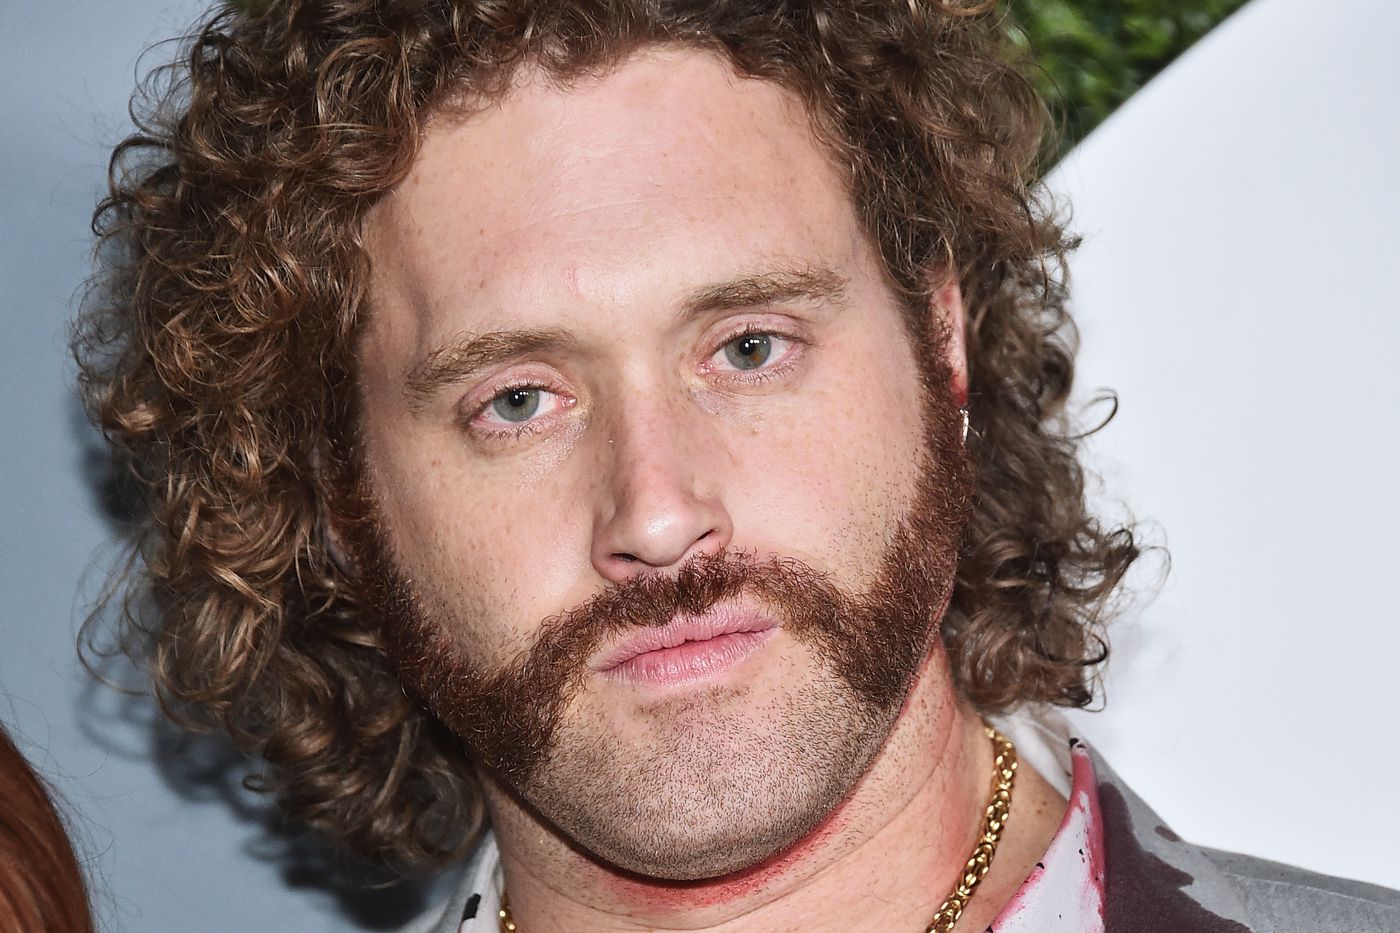 How to book TJ Miller? Anthem Talent Agency